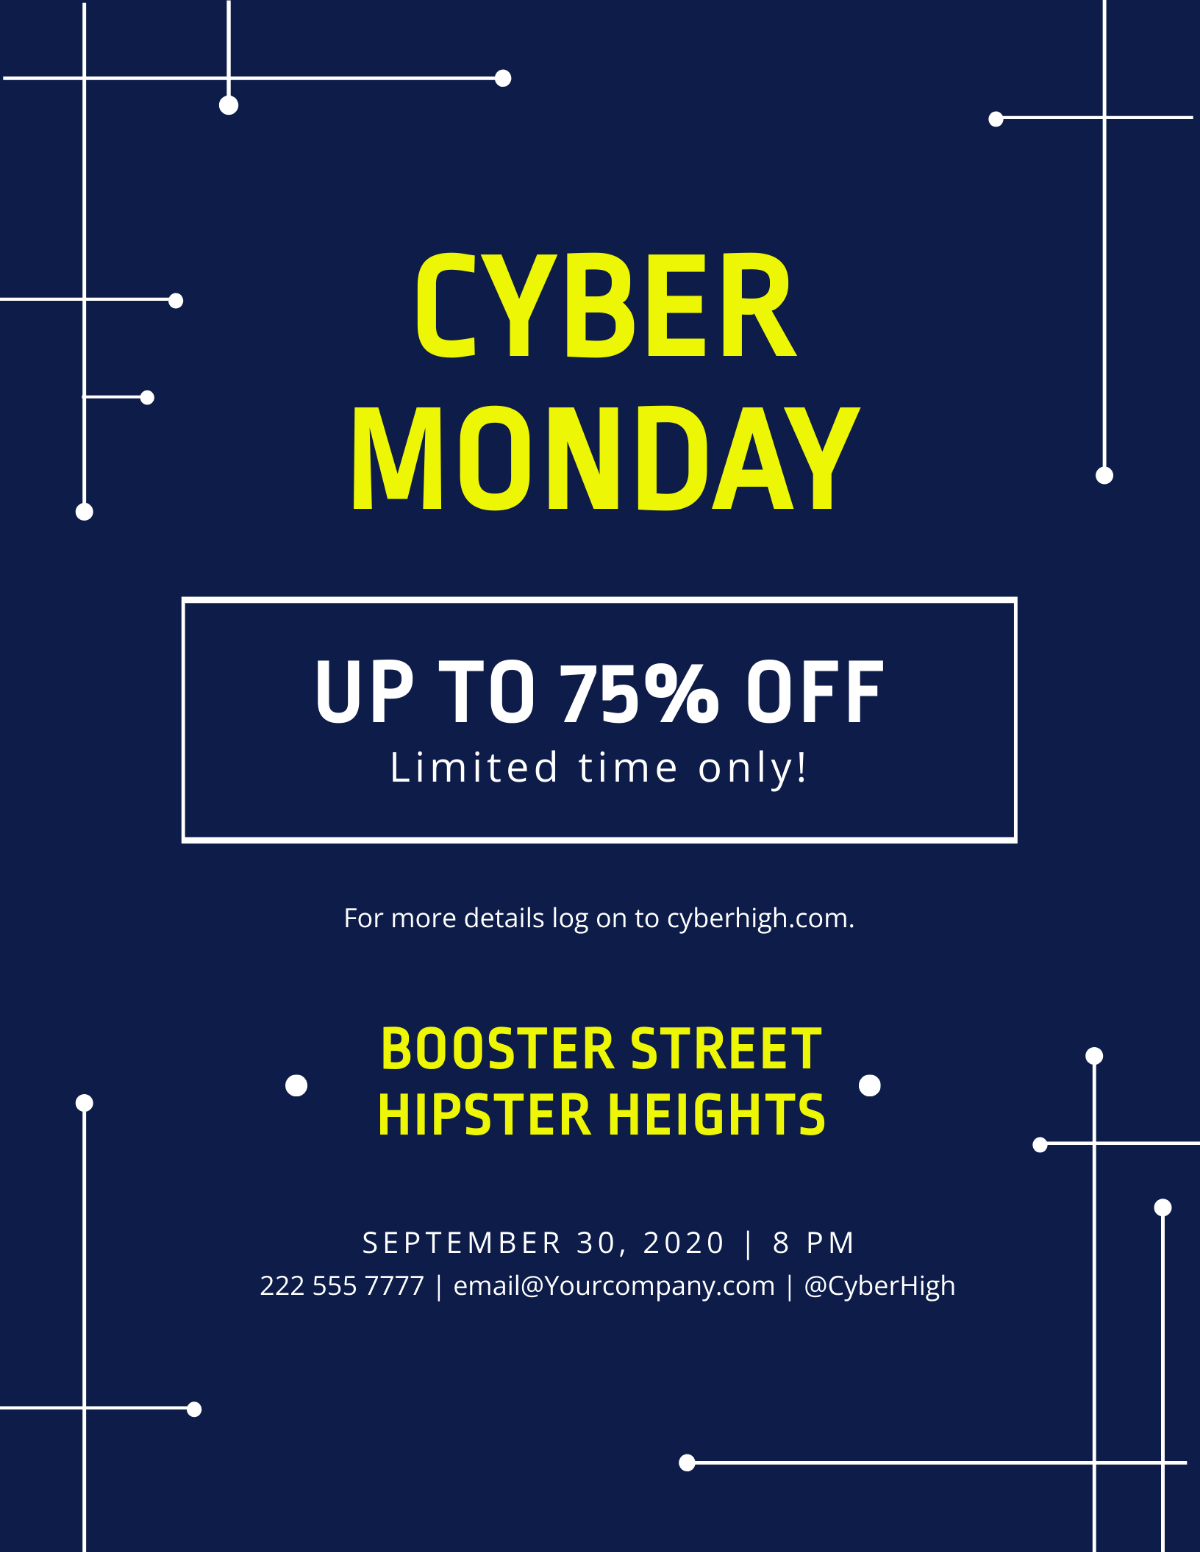 Cyber Monday Discount Flyer Template